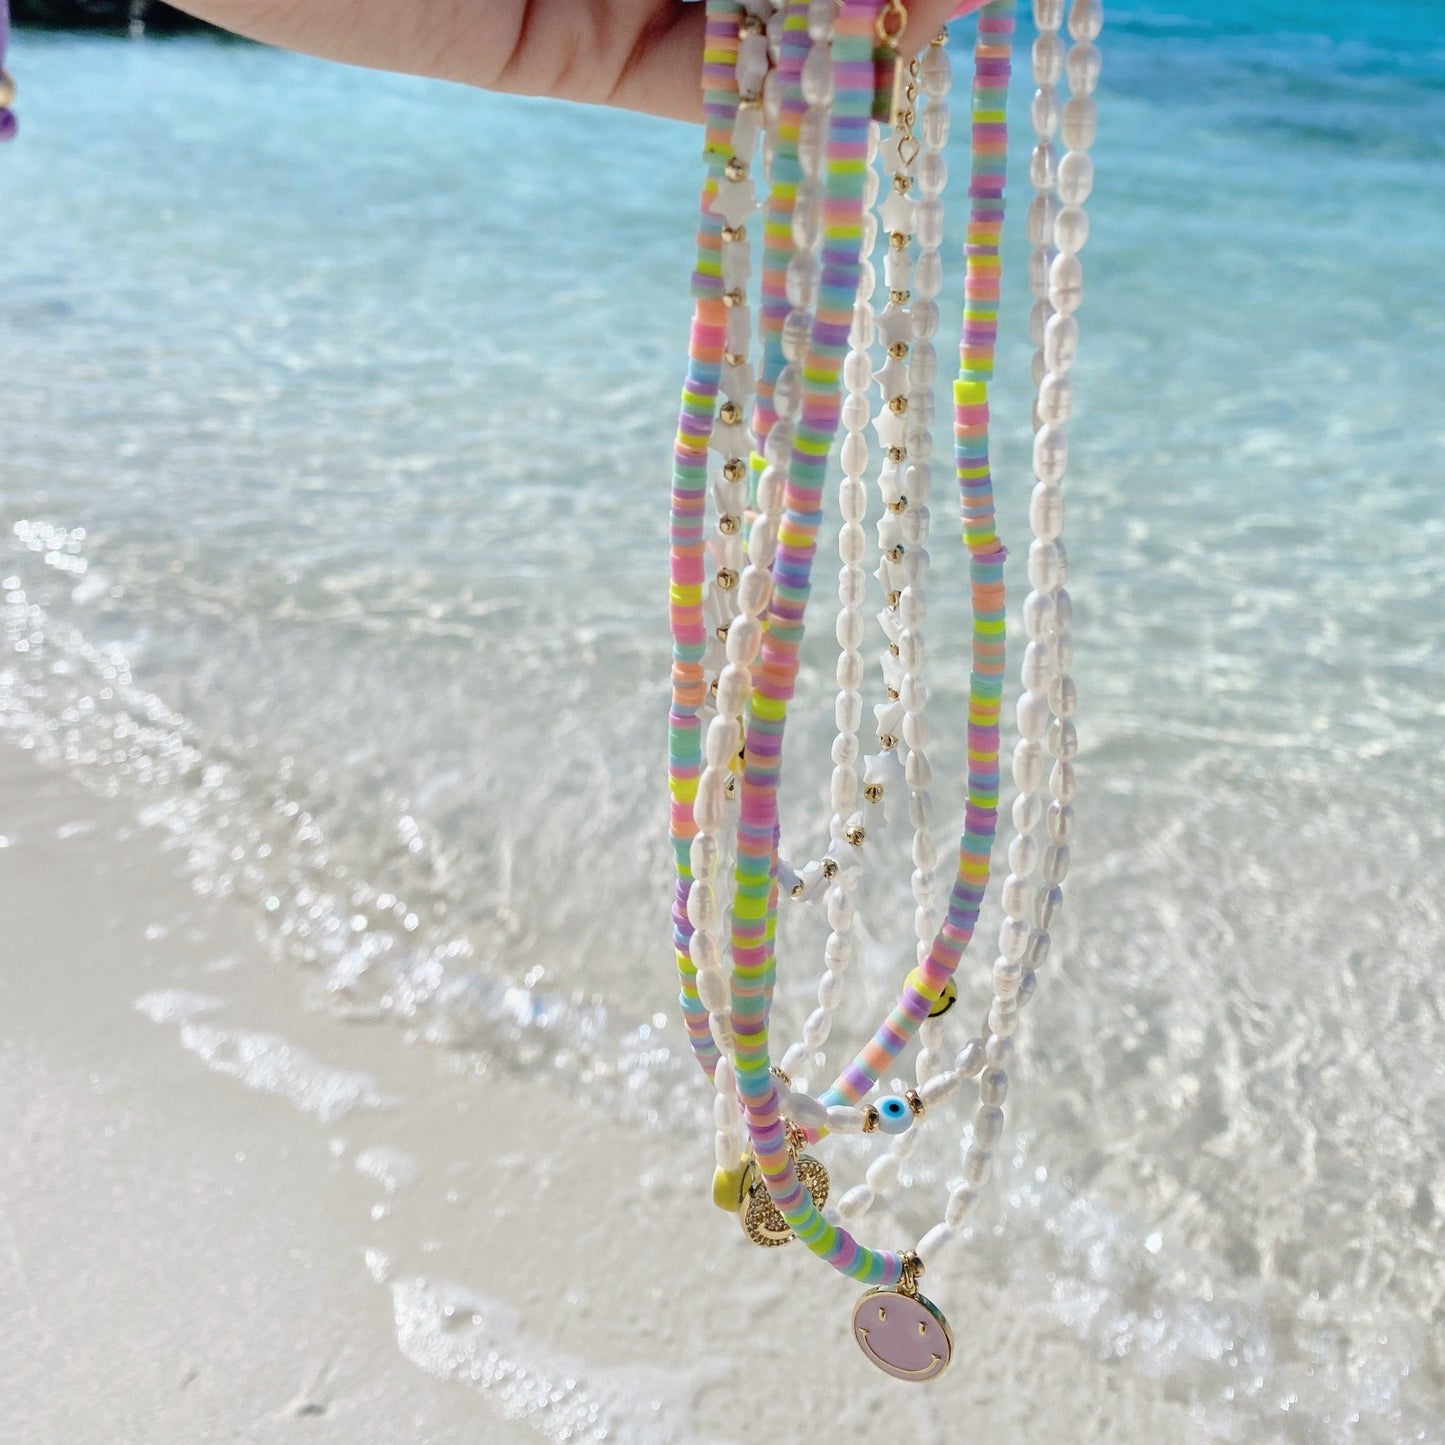 Puka pearl necklace, summer babe, new arrival, isvi boutique